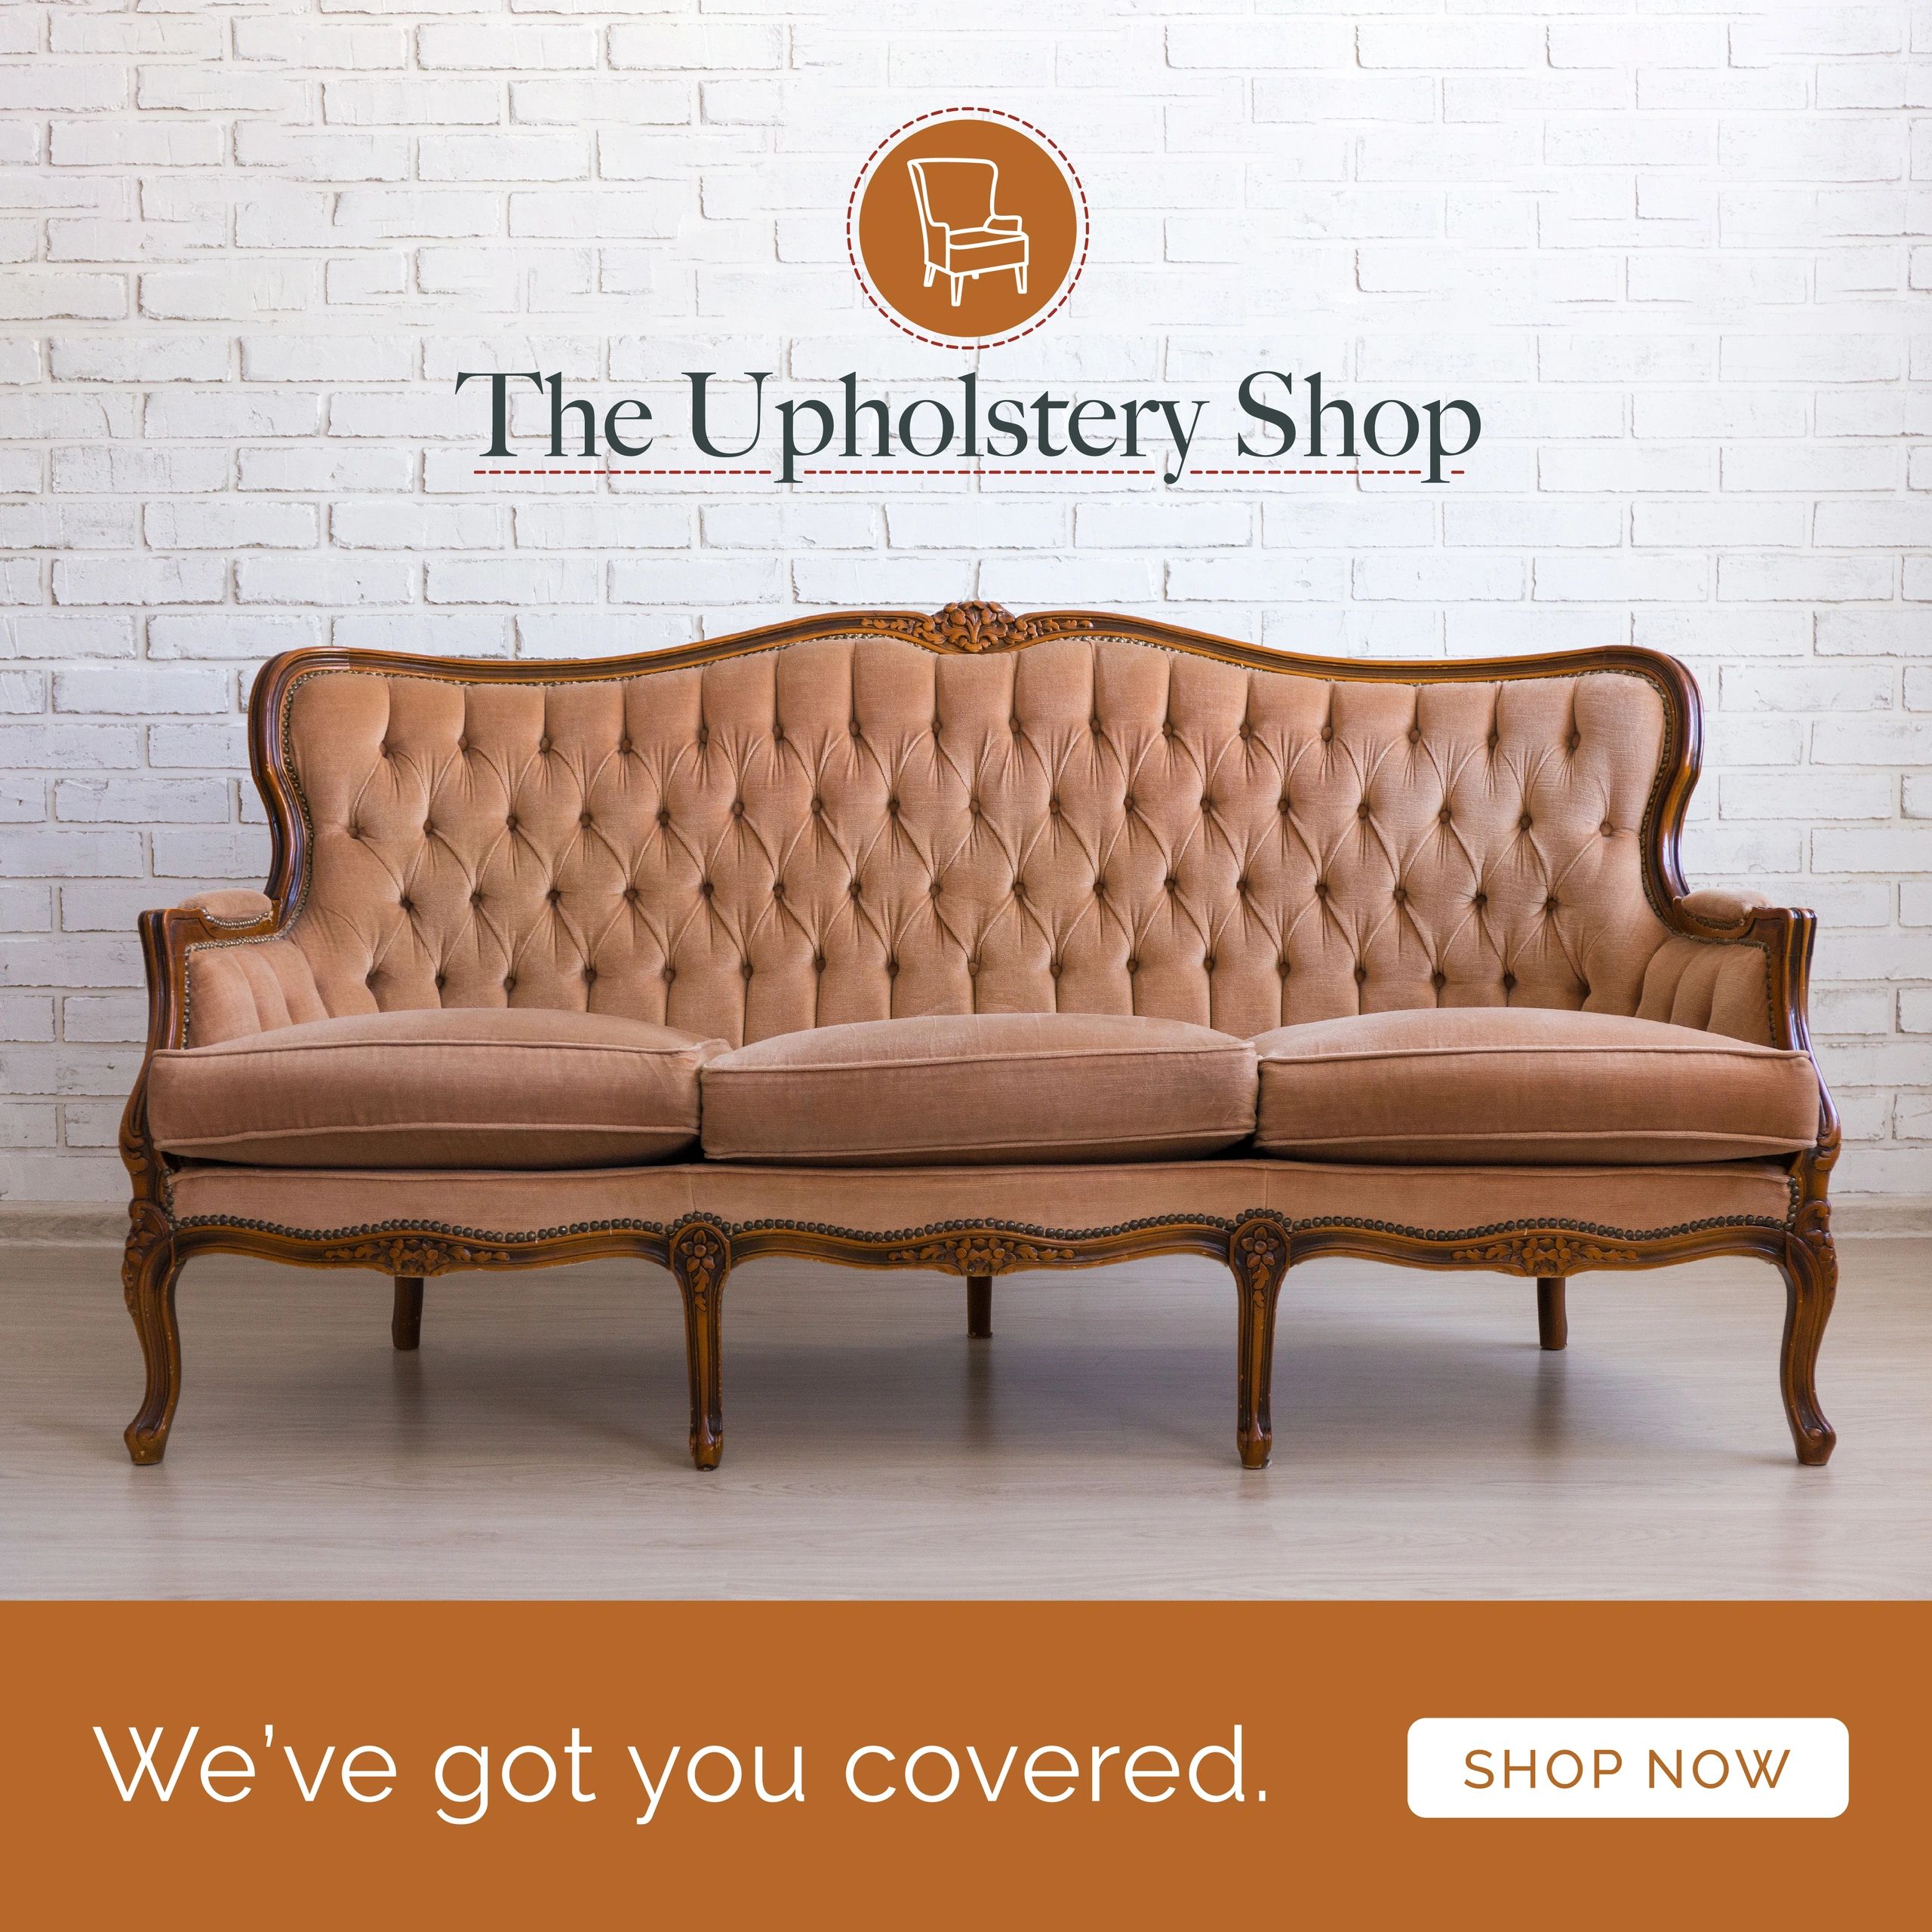 The Upholstery Shop